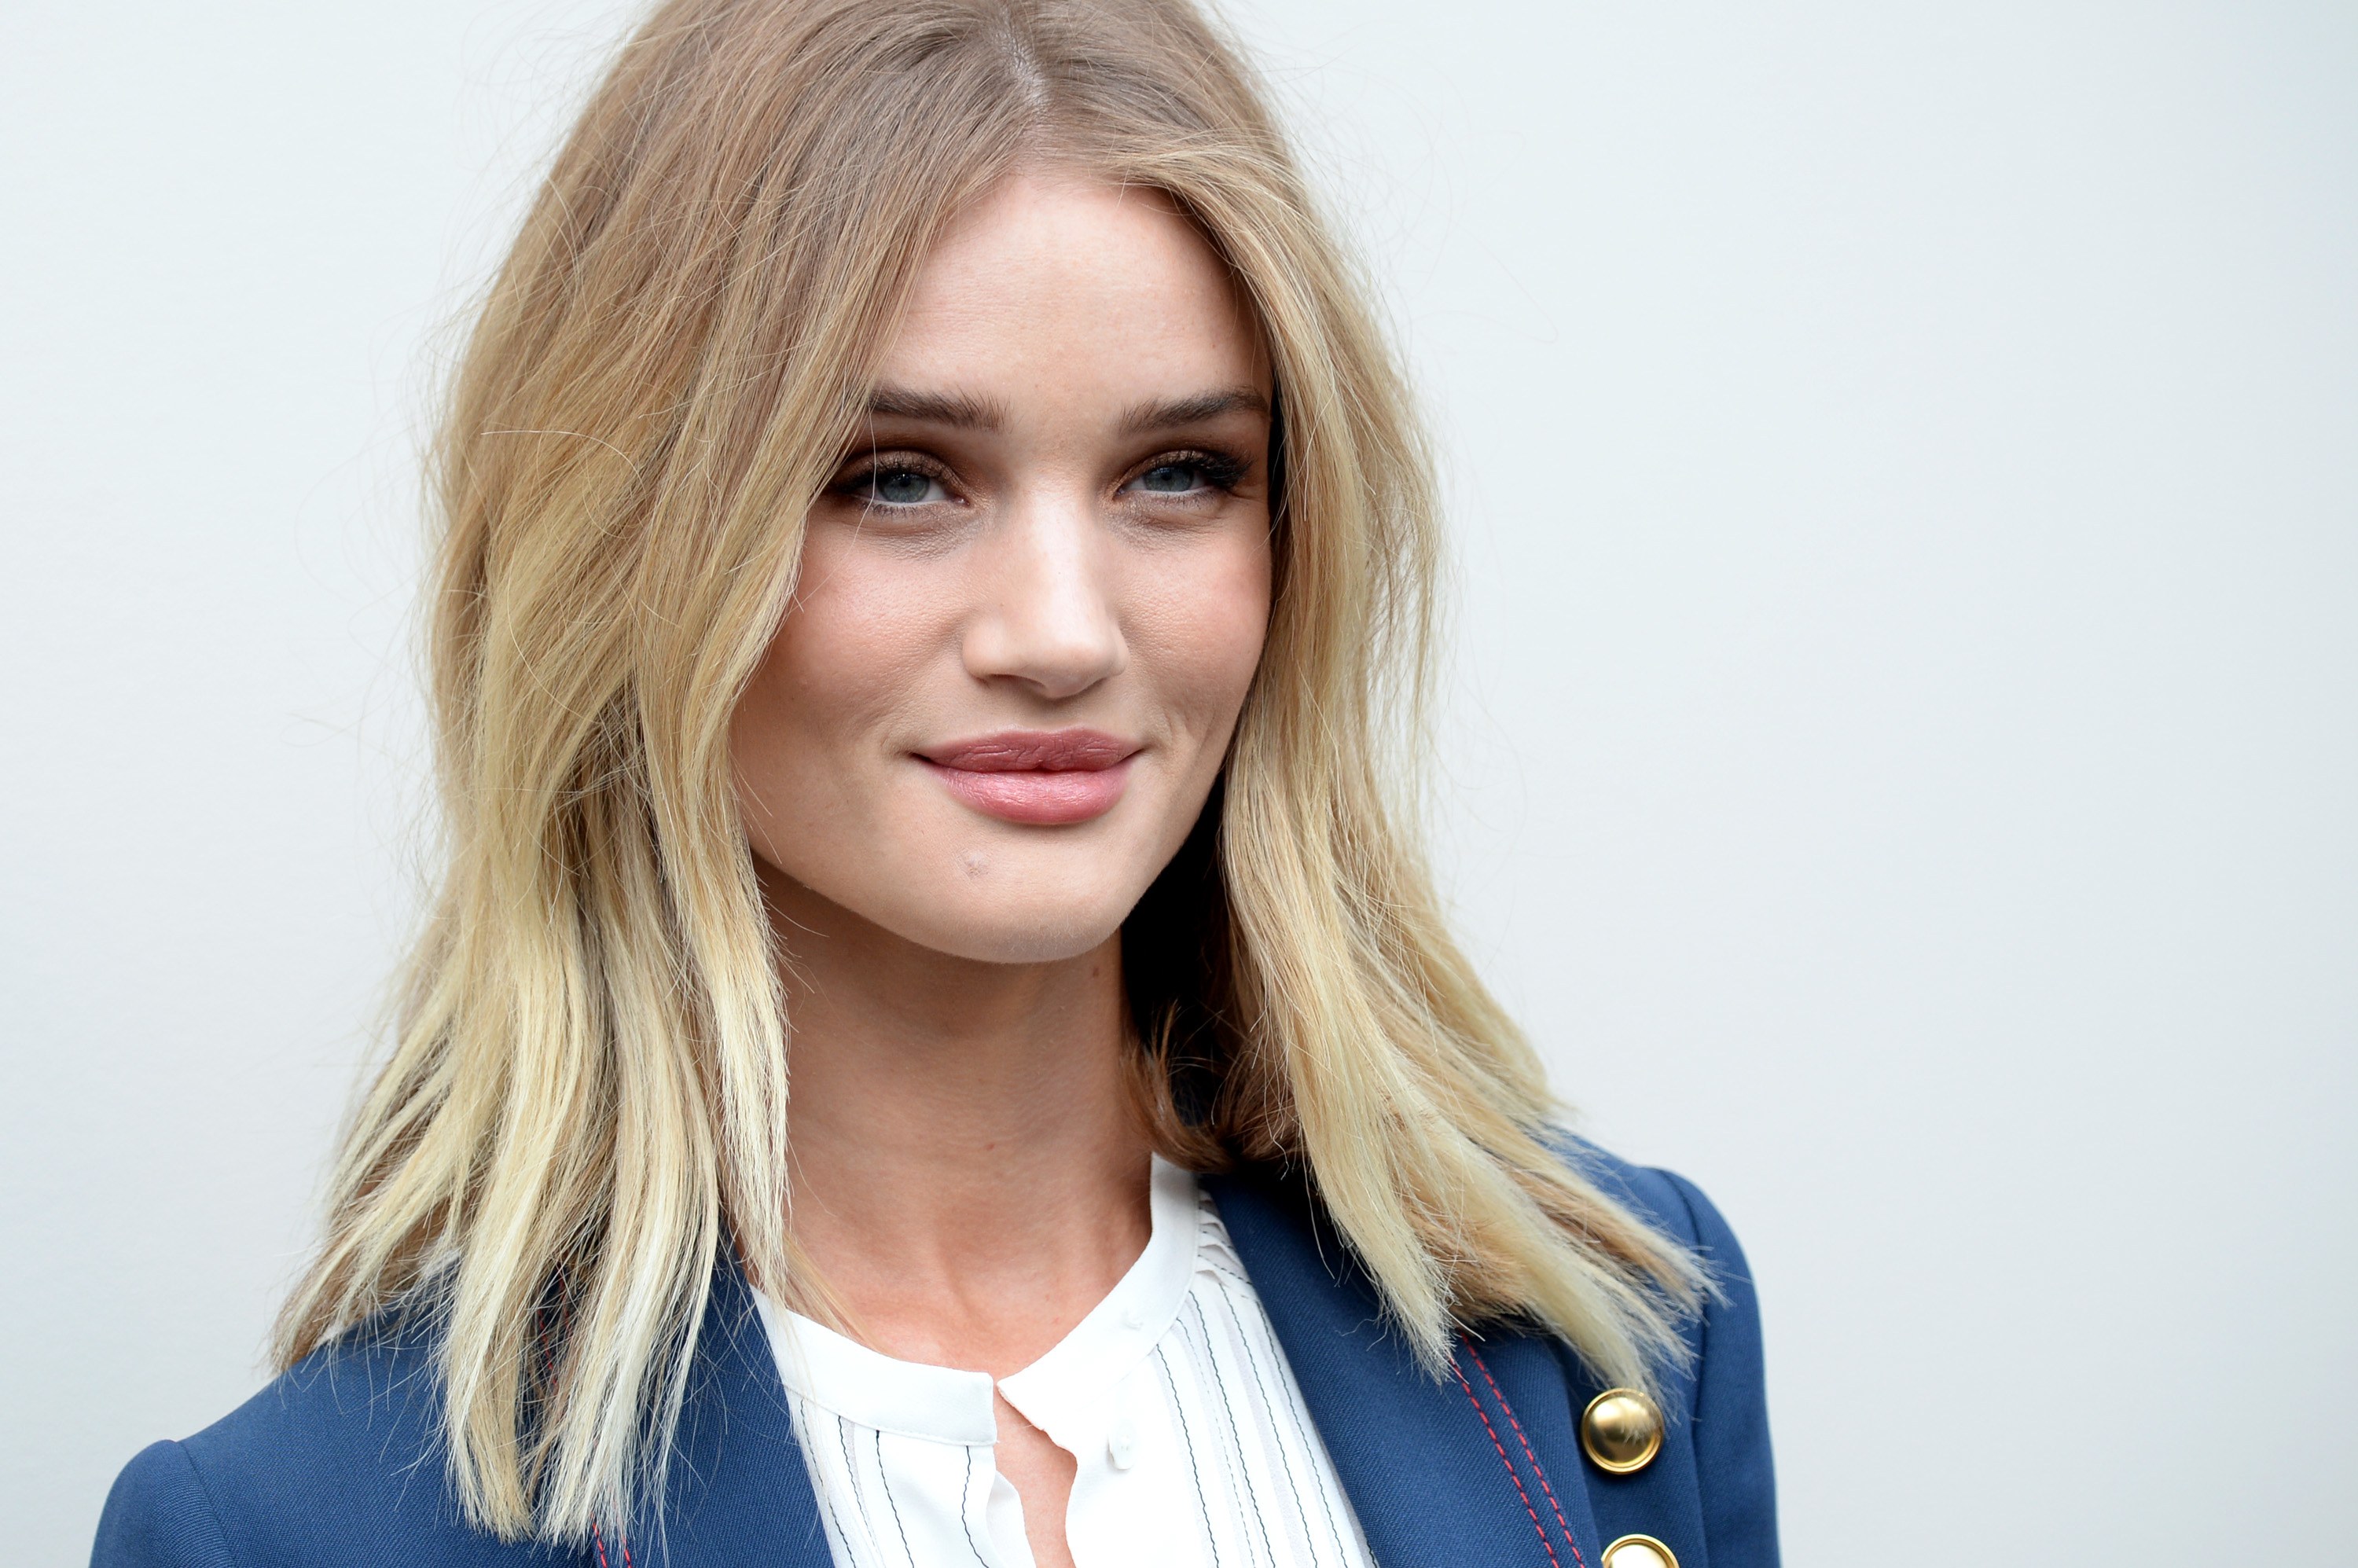 How To Achieve The Flawless Rosie Huntington Whiteley Look